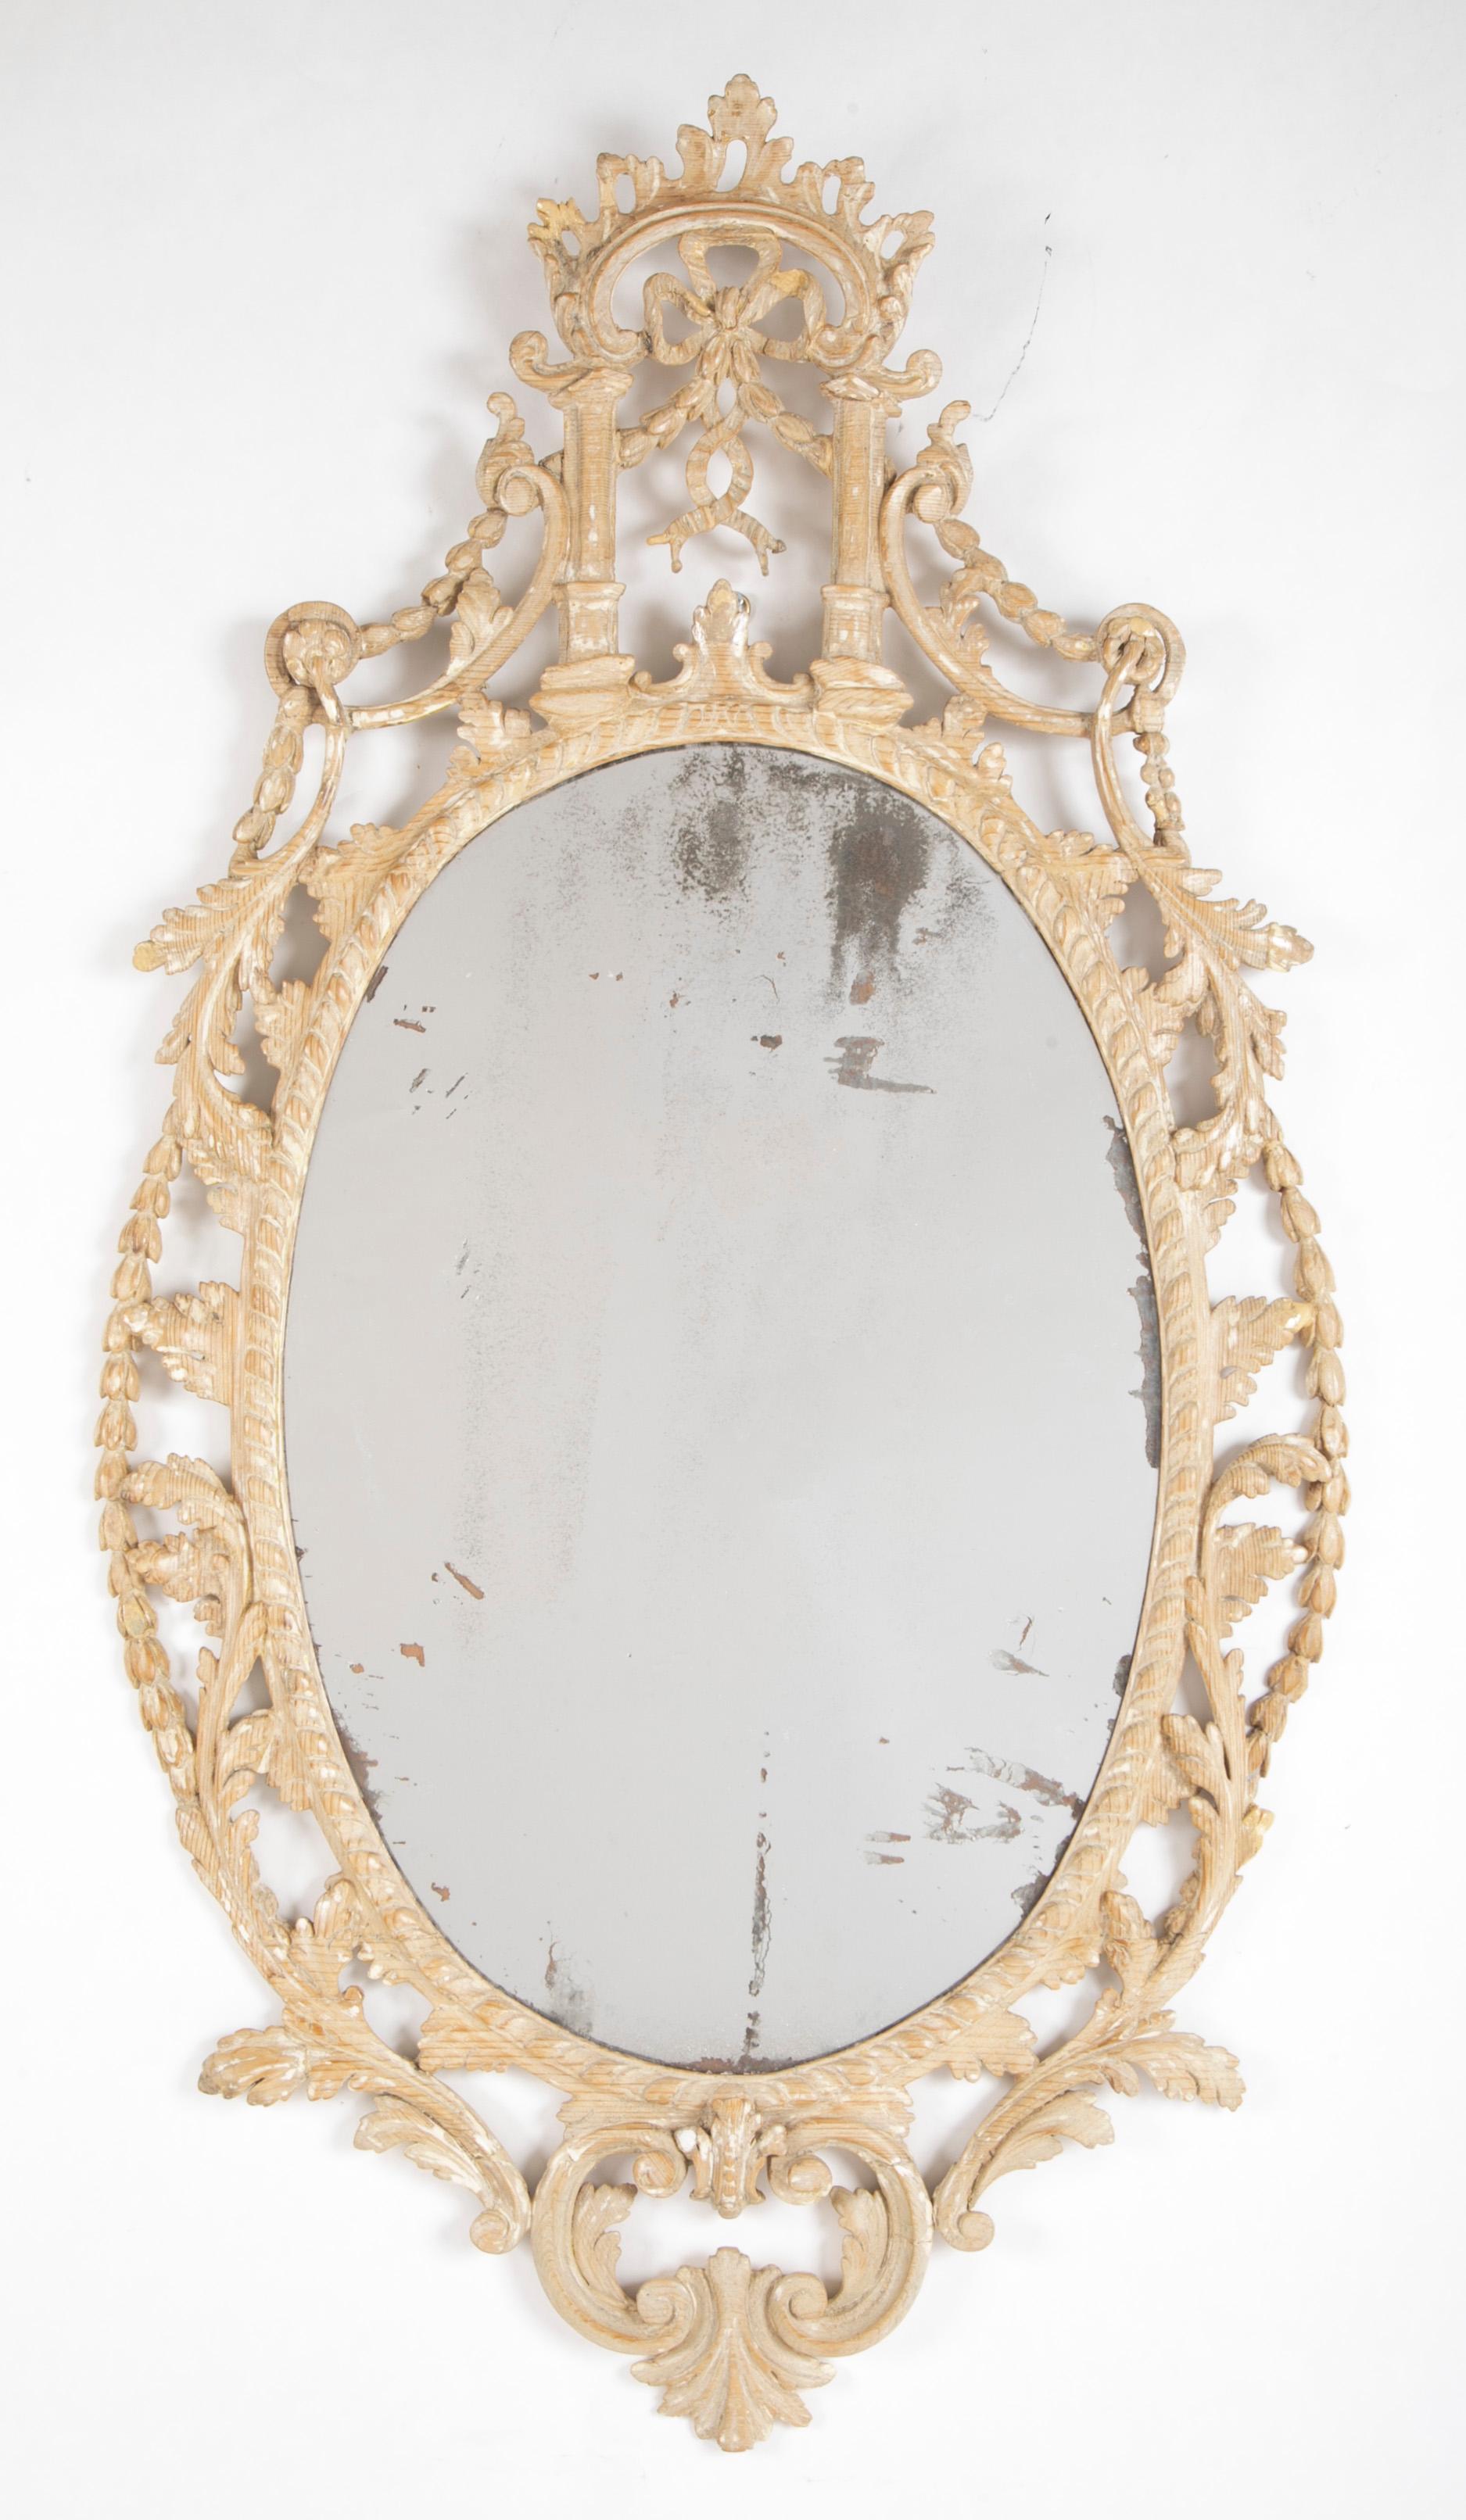 Very fine and elegant pair of carved pine Adam Style oval mirrors. Detailed and delicate acanthus and floral carving throughout. Each crowned with a pair of columns supporting an arch with exquisitely carved bow, with a bell flower garland. The pine